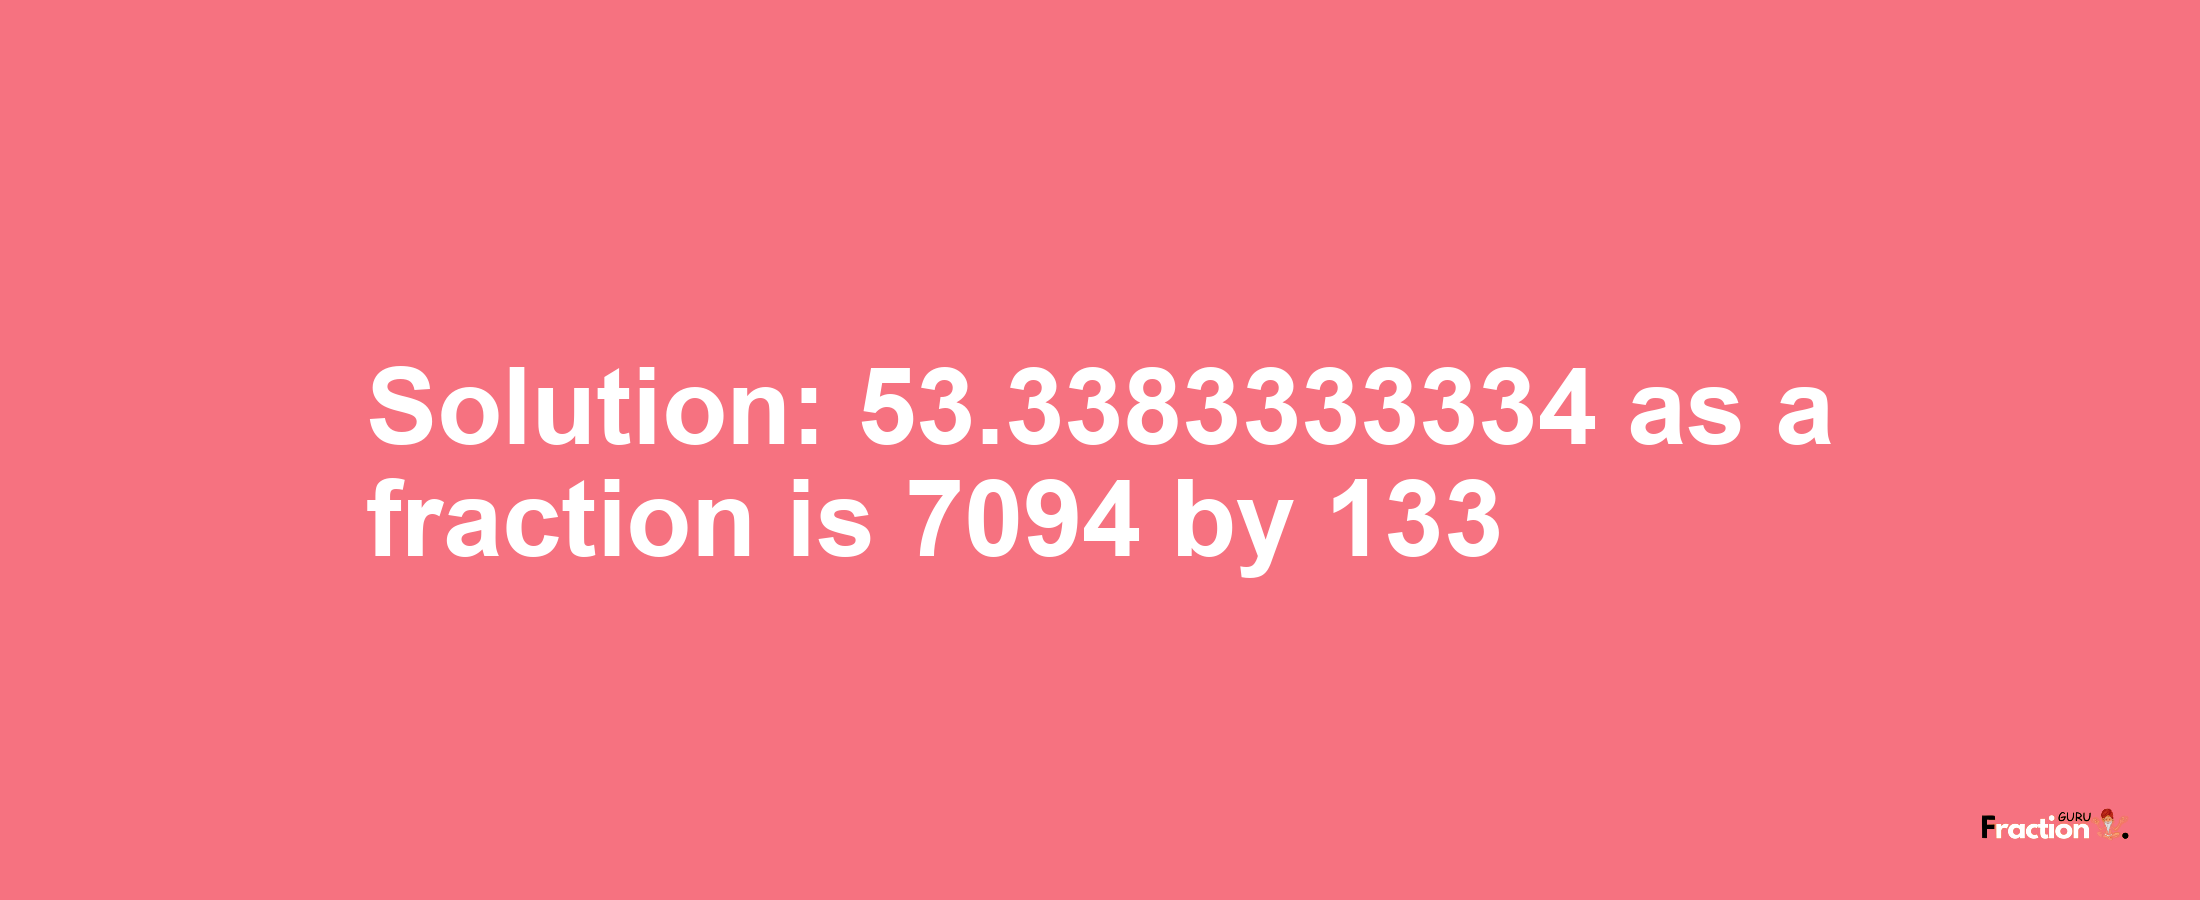 Solution:53.3383333334 as a fraction is 7094/133